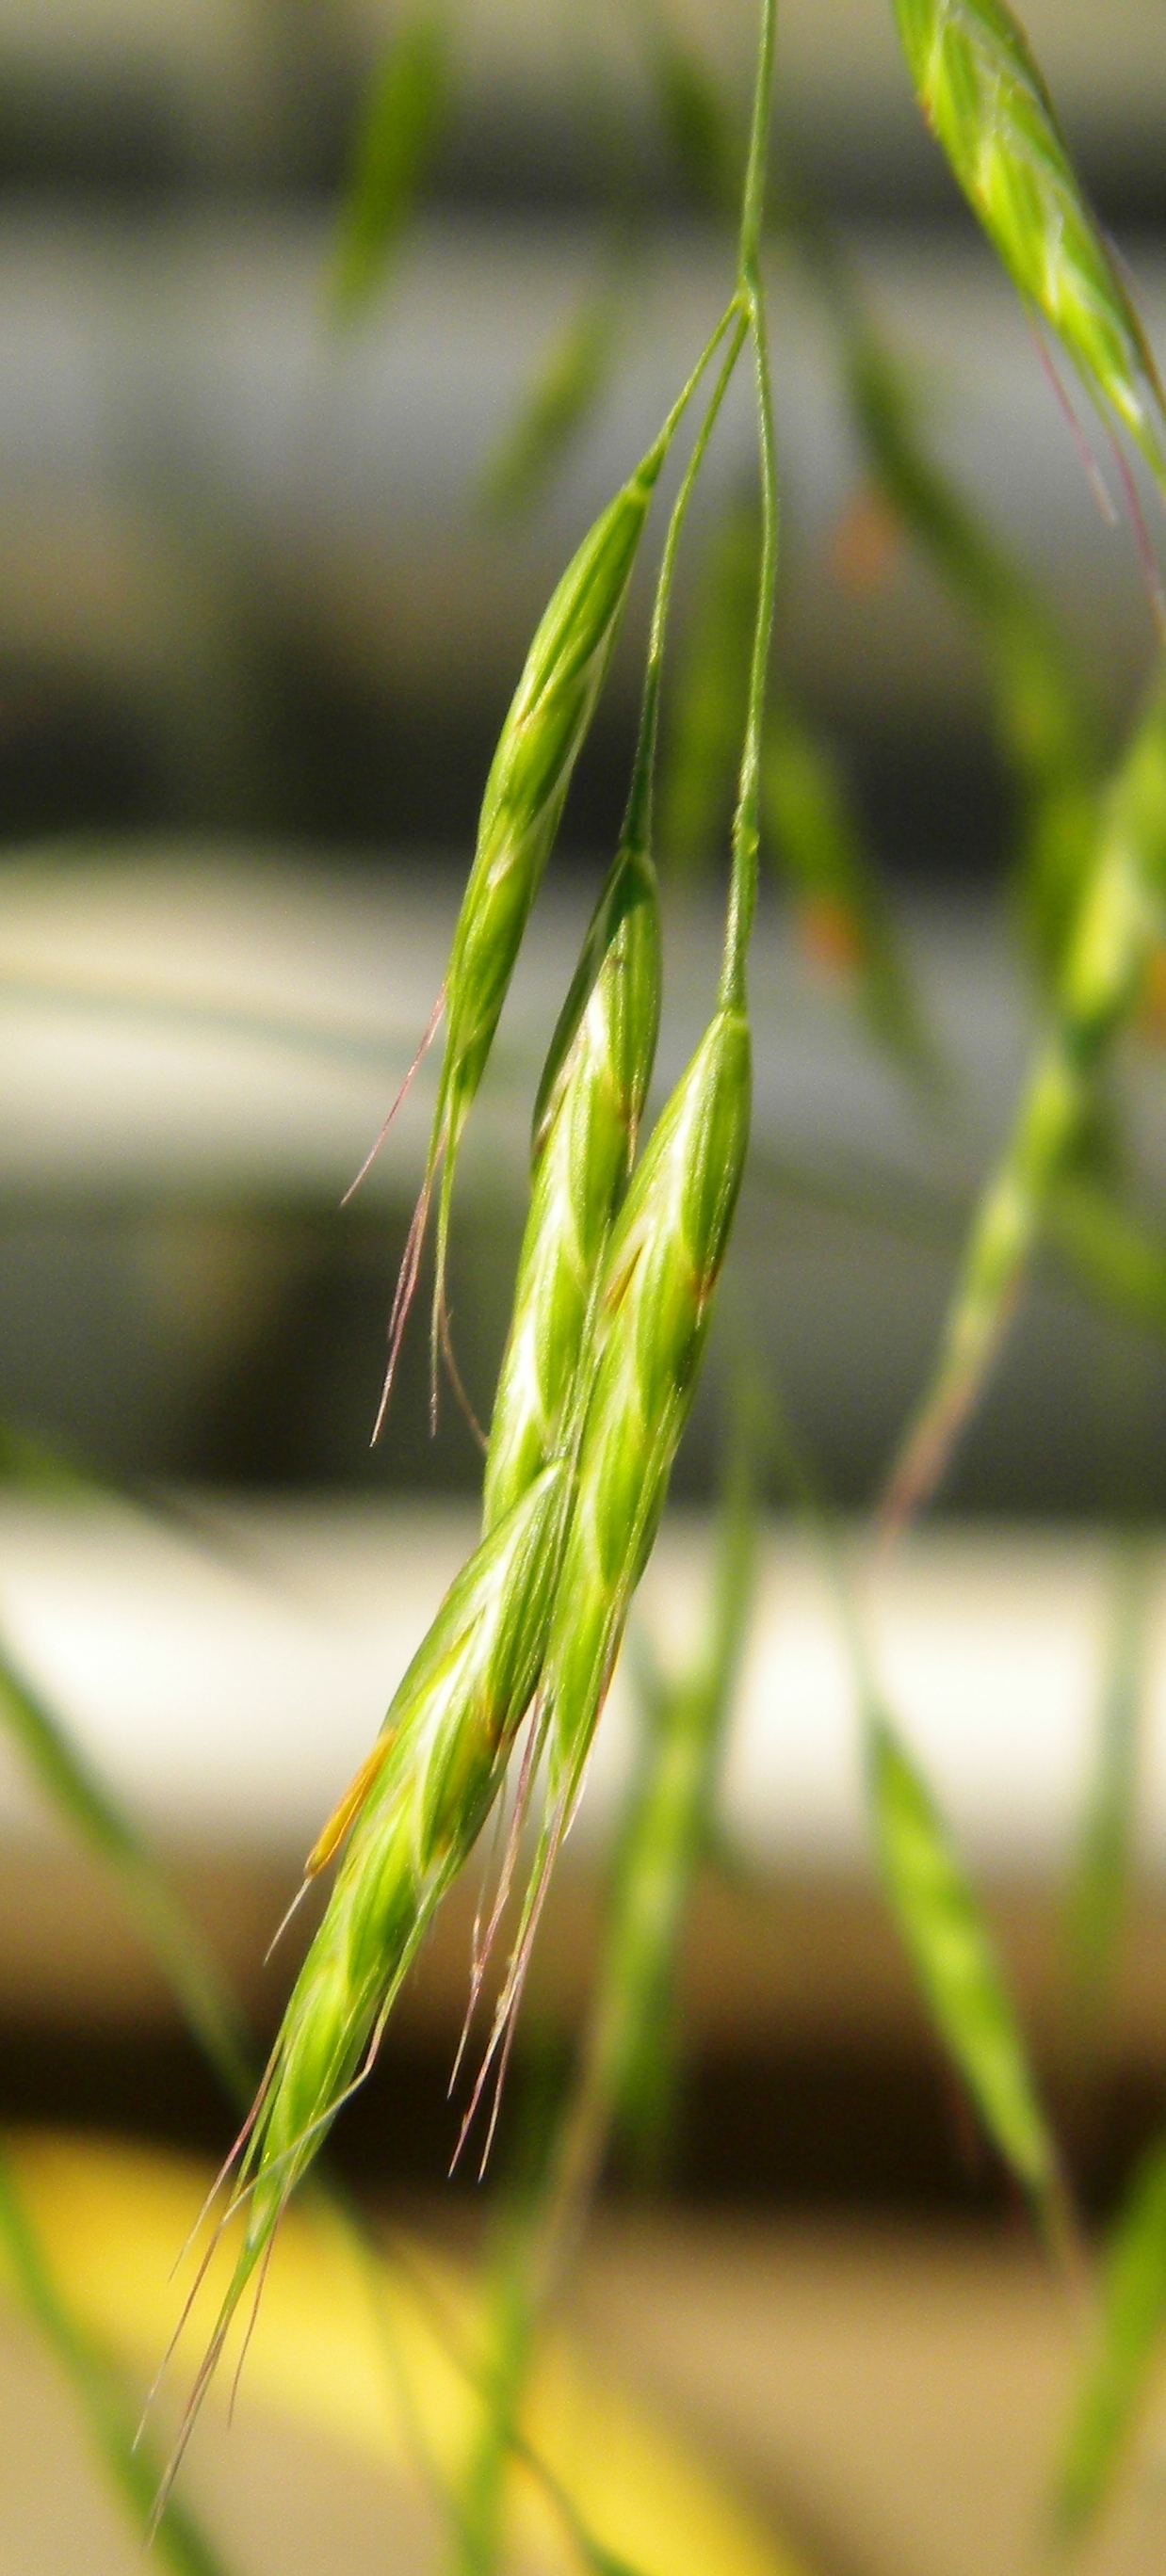 Spikelets with light green seeds and awns